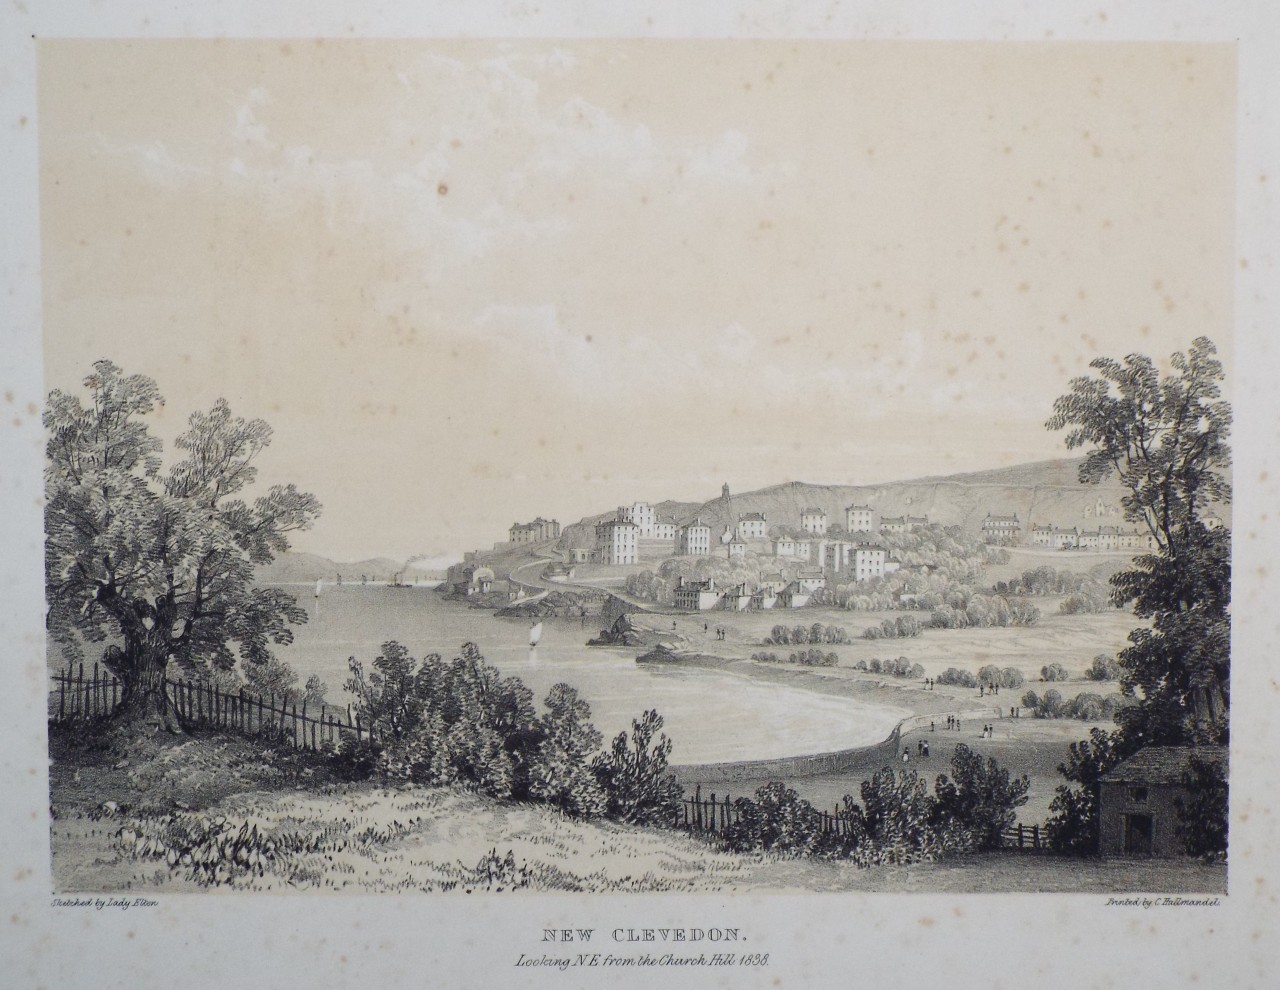 Lithograph - New Clevedon. Looking N E from the Church Hill 1838.